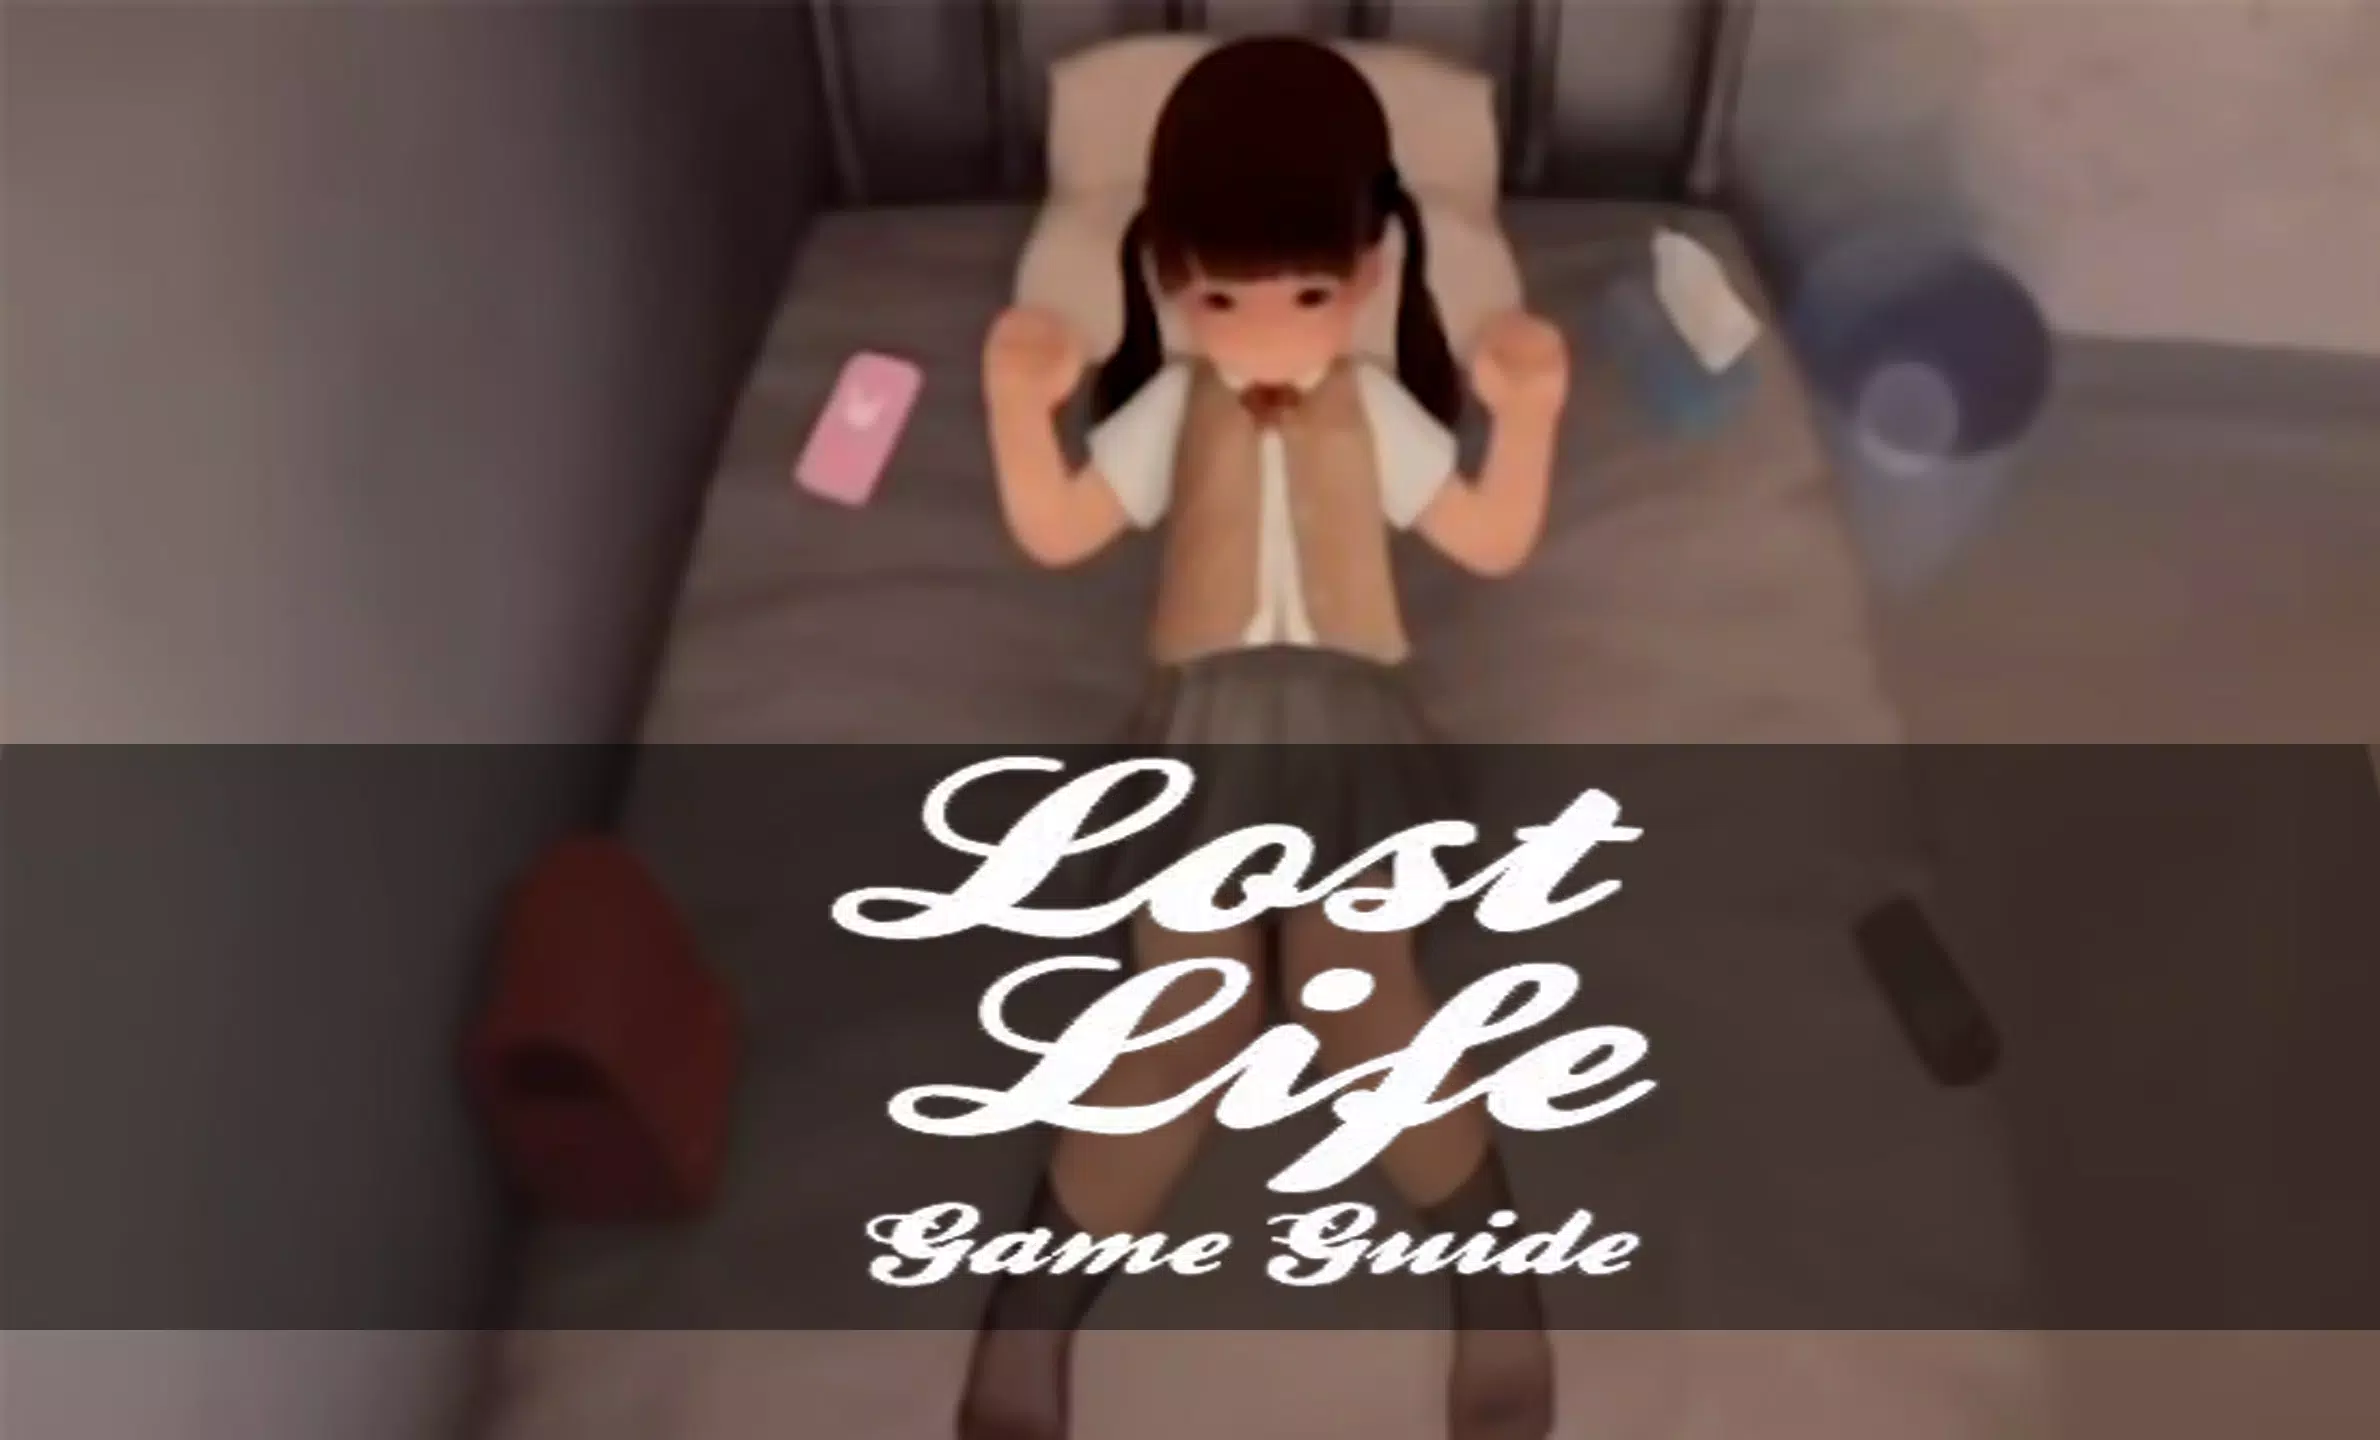 Download Lost Life Game walktrough android on PC